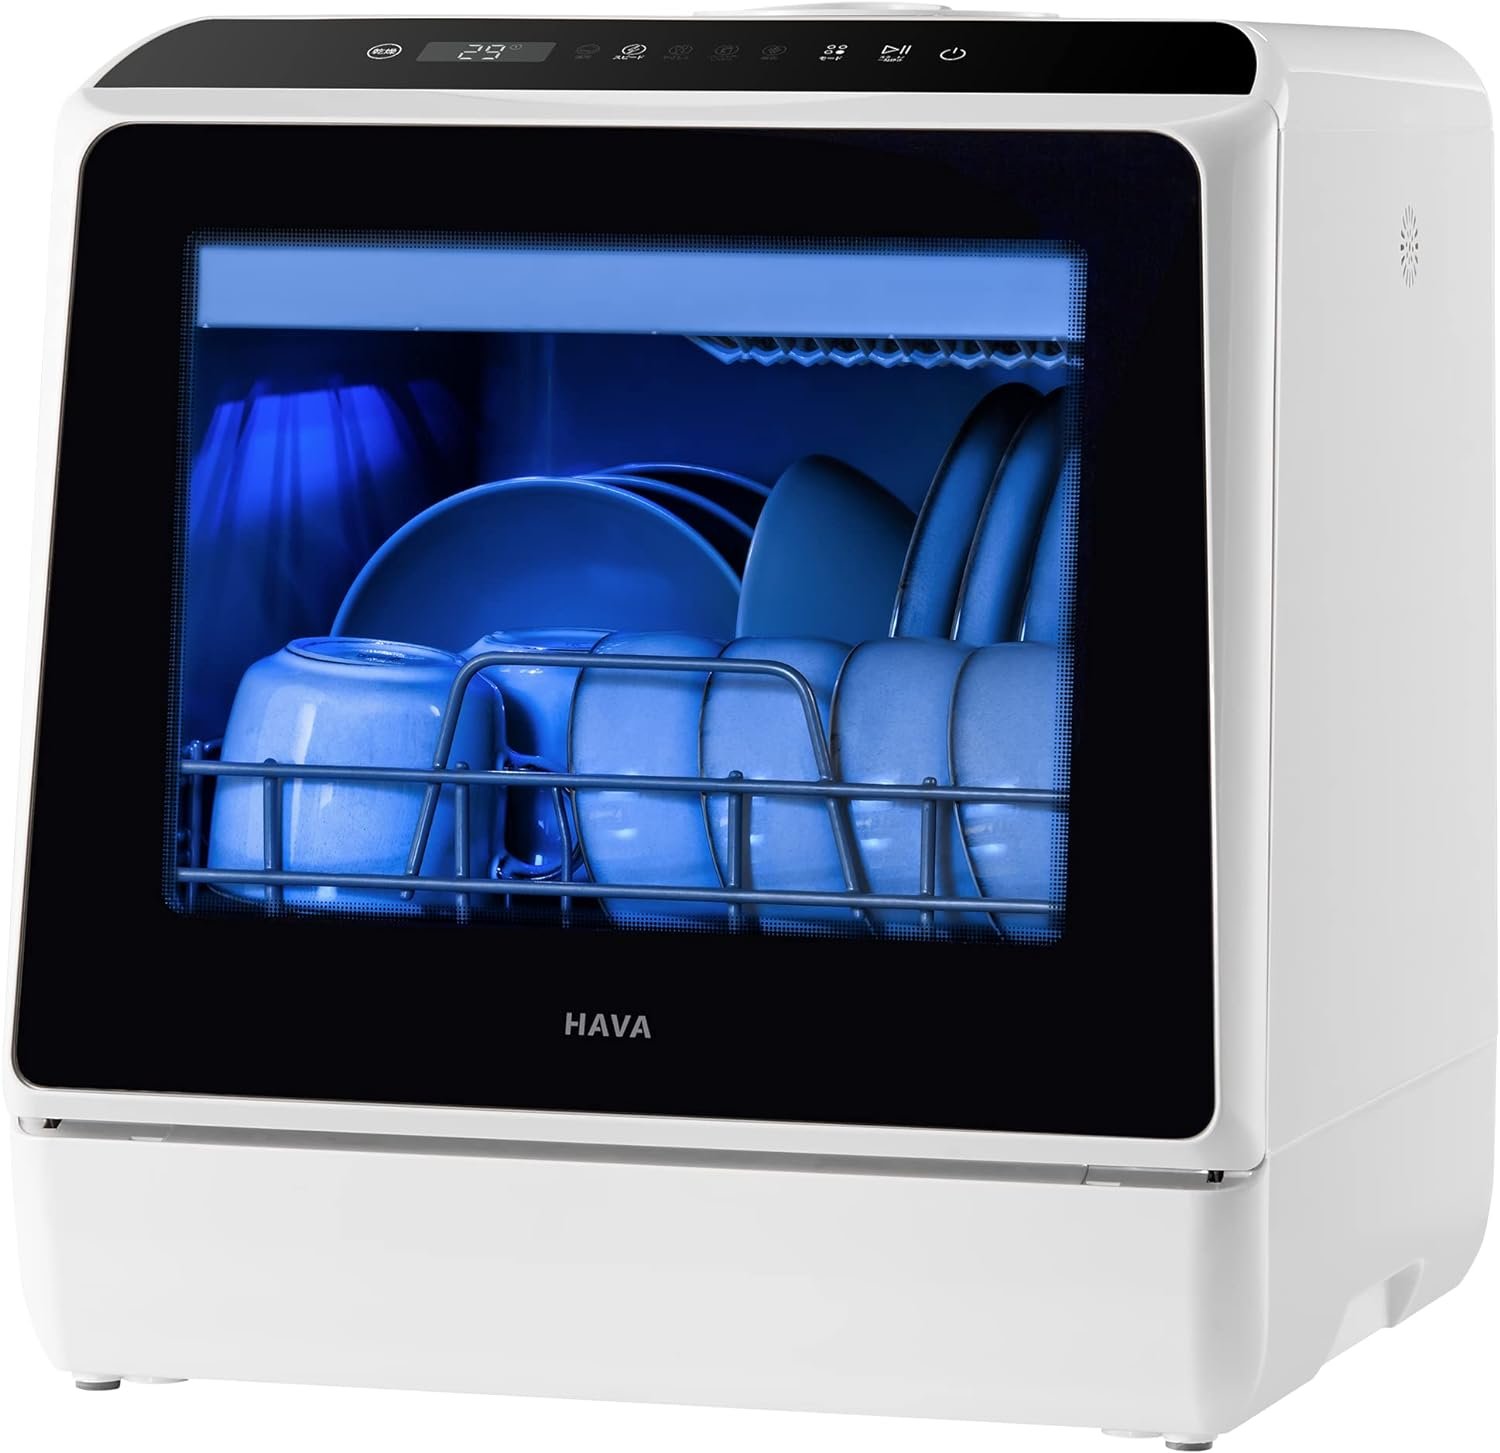 HAVA Dishwashers with 5 L Built-in Water Tank